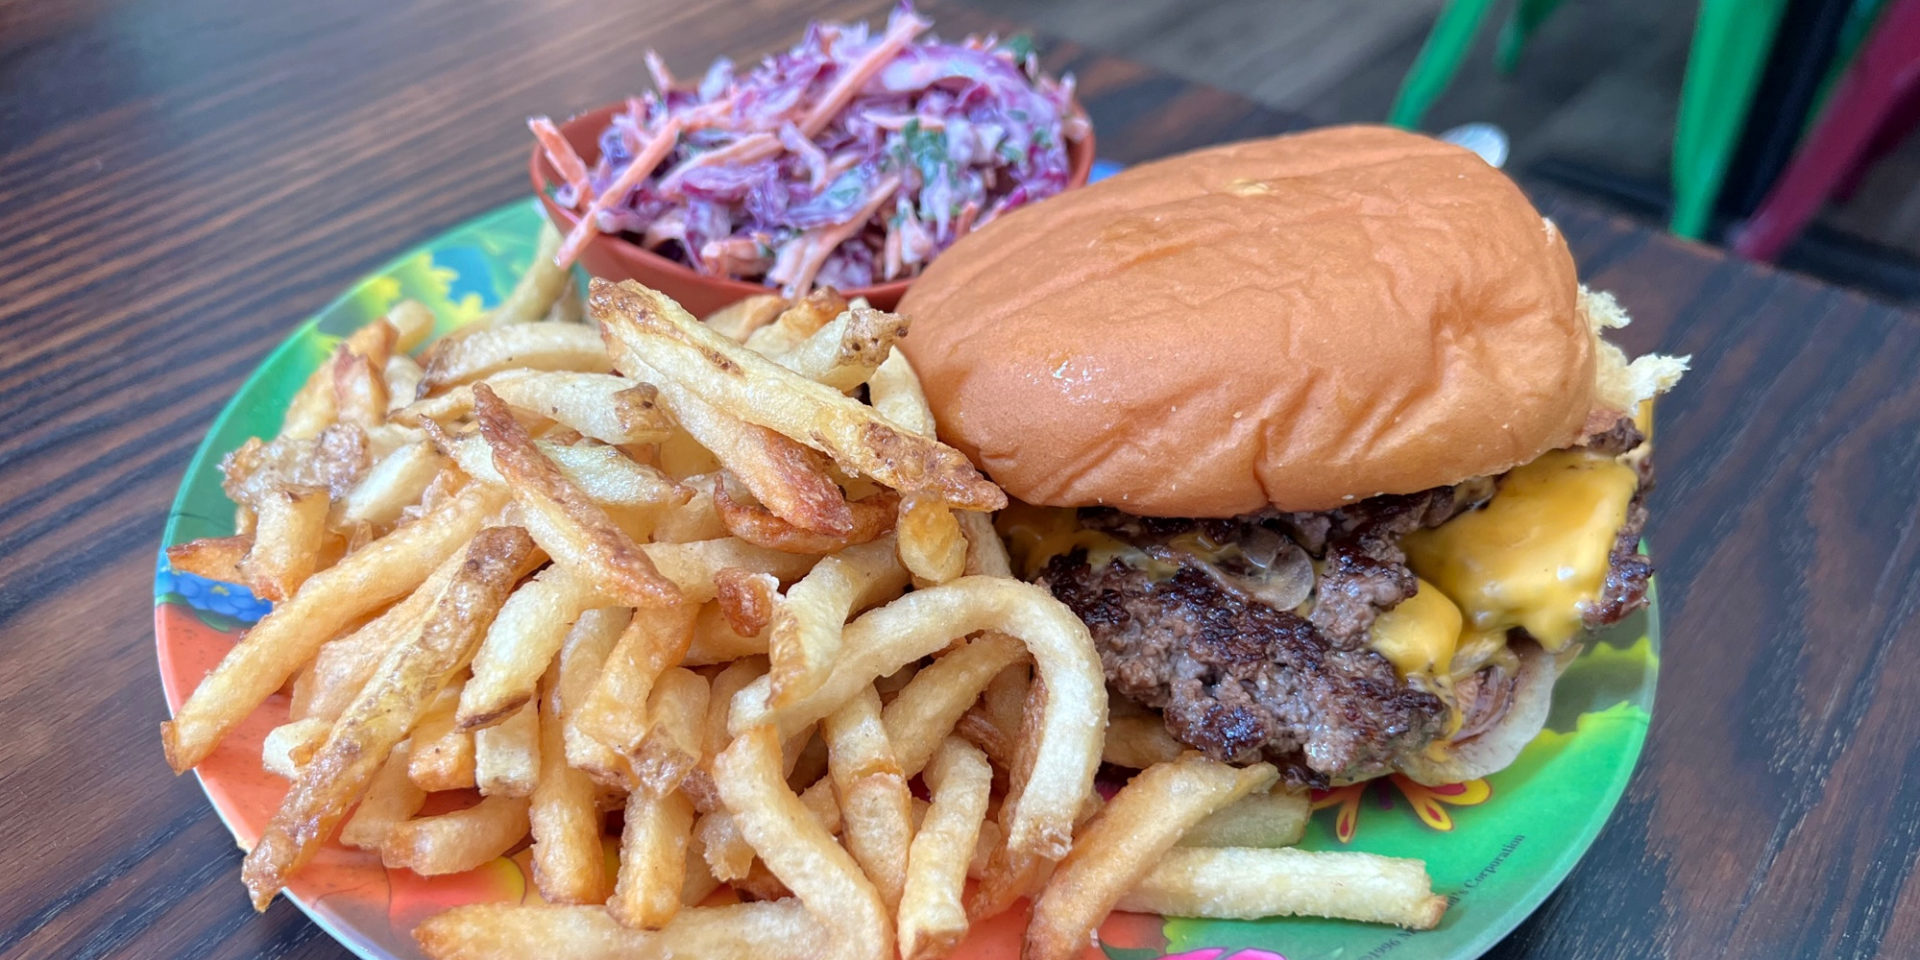 A delicious burger and fries with a side of purple coleslaw is on an old McDonalds plate in Champaign, Illinois. Photo by Alyssa Buckley.